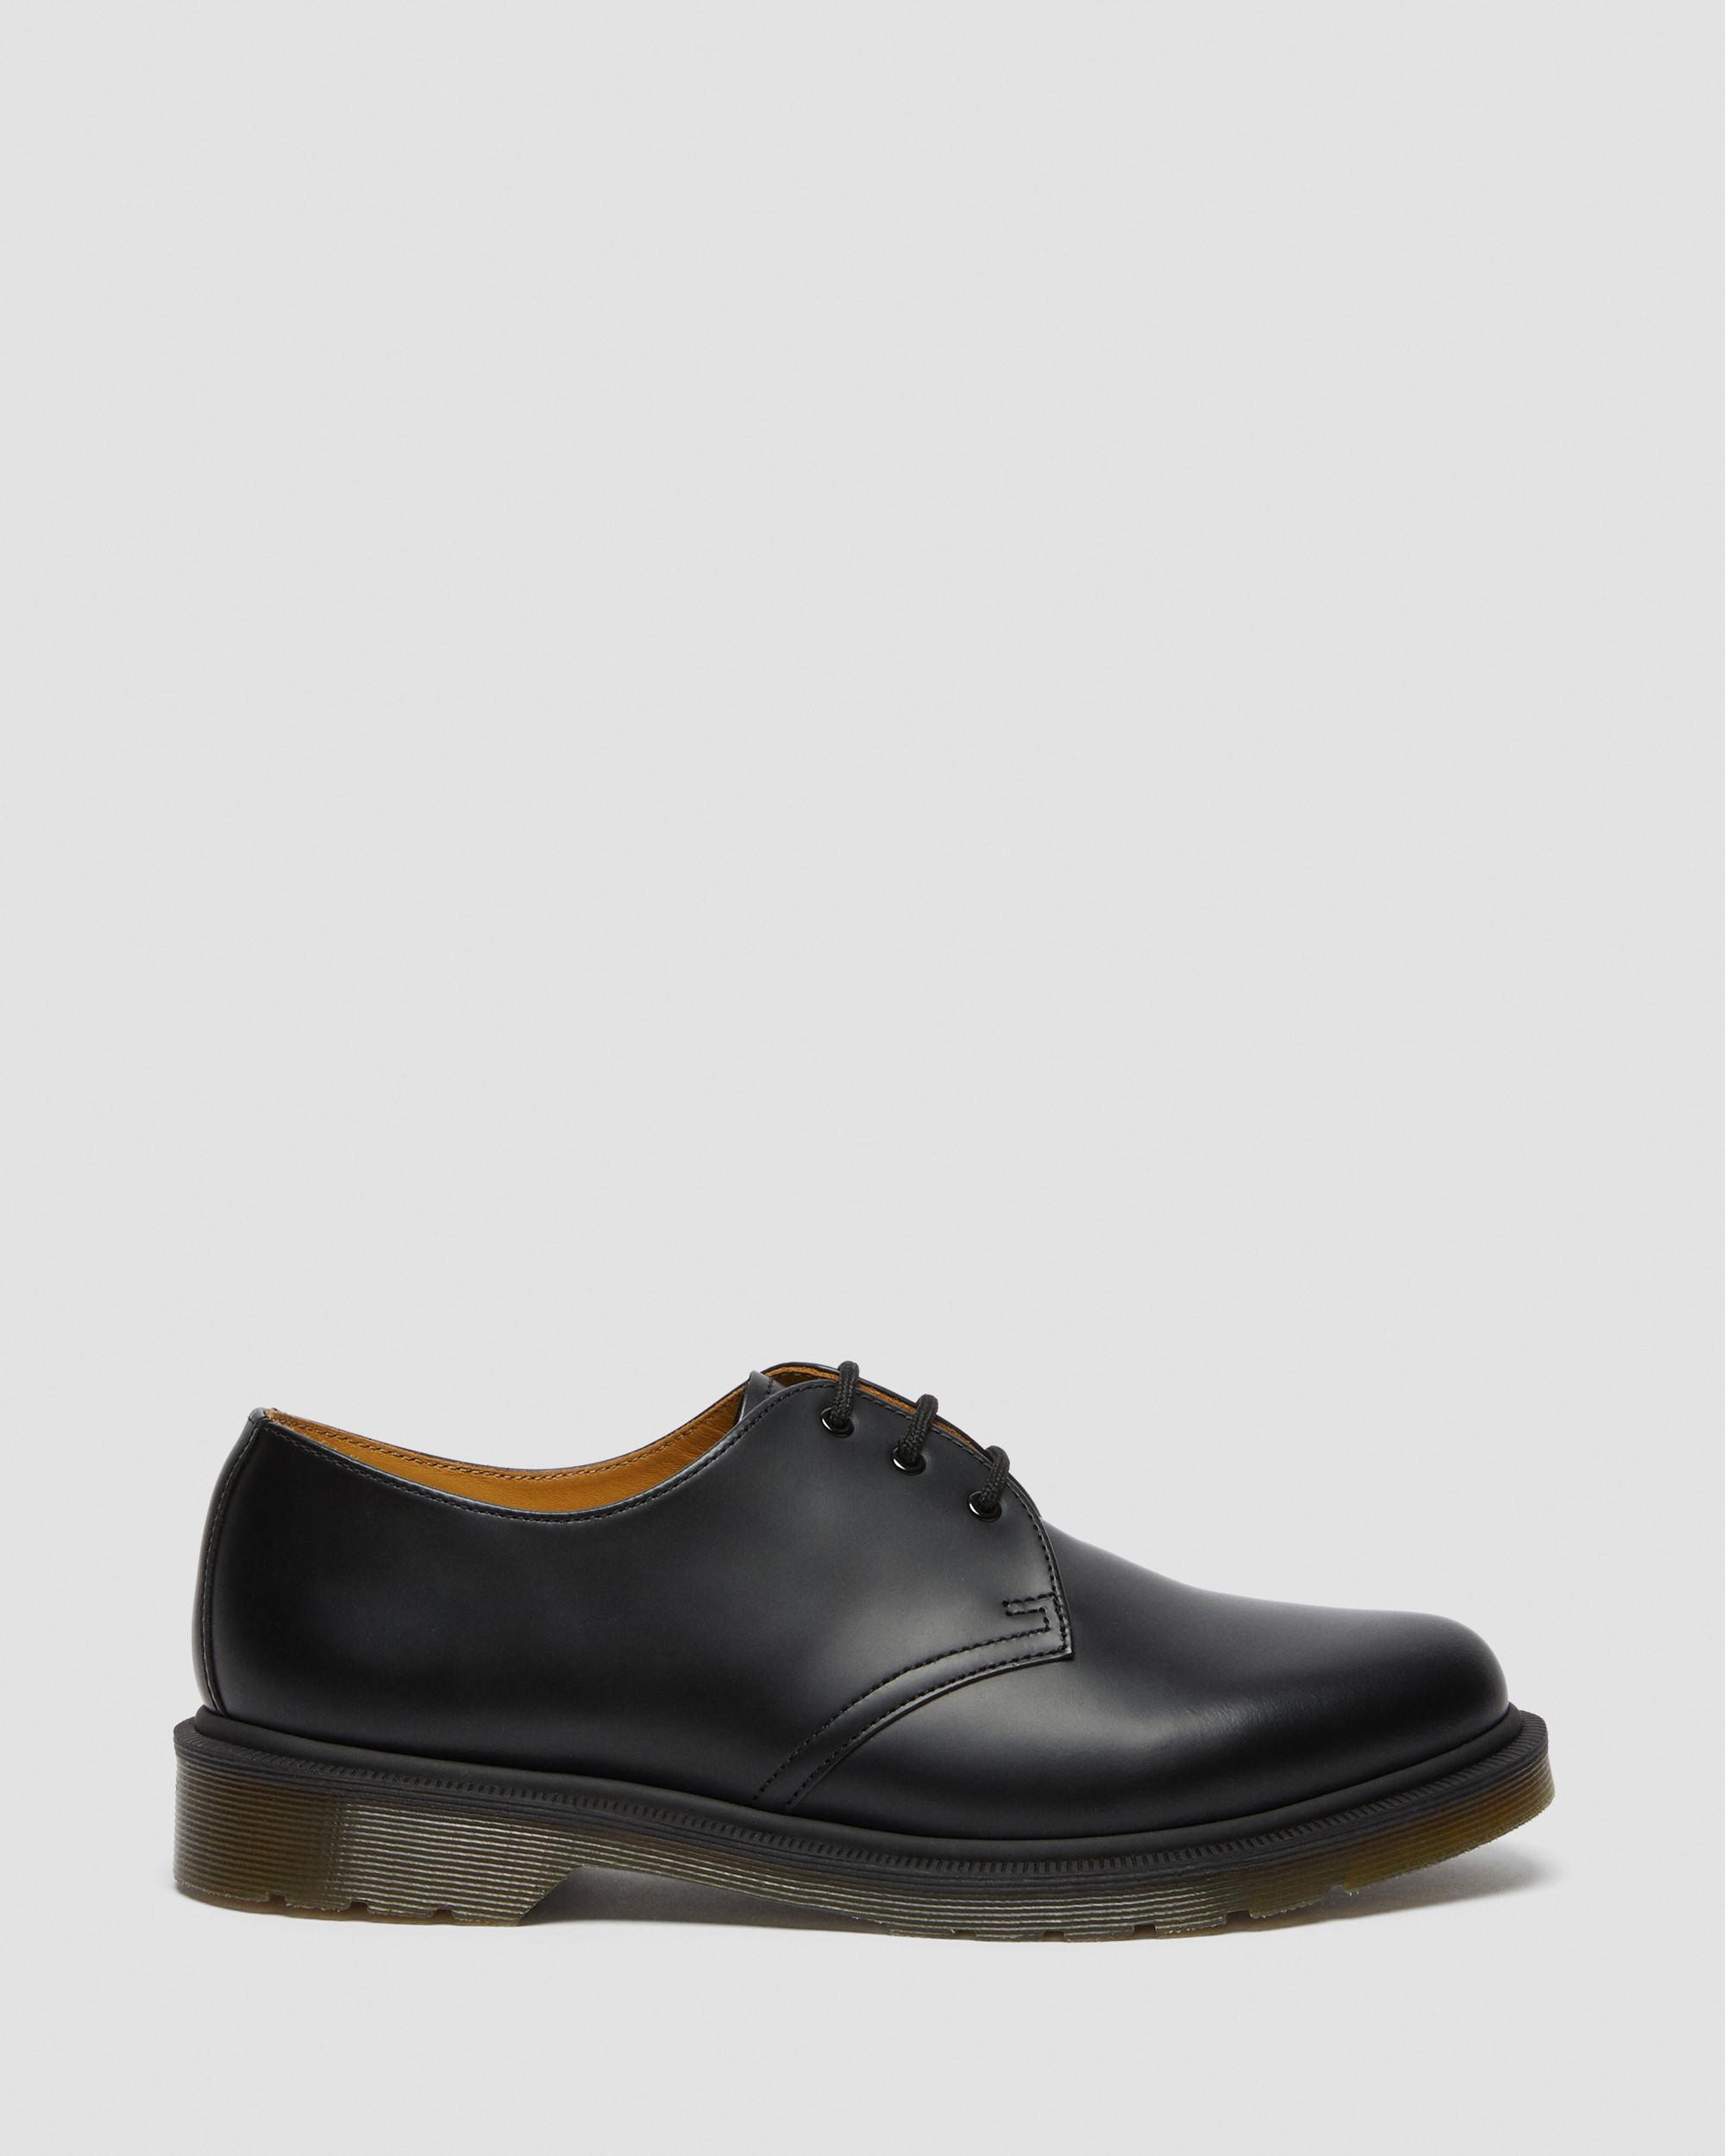 1461 Narrow Plain Welt Smooth Leather Oxford Shoes in Black